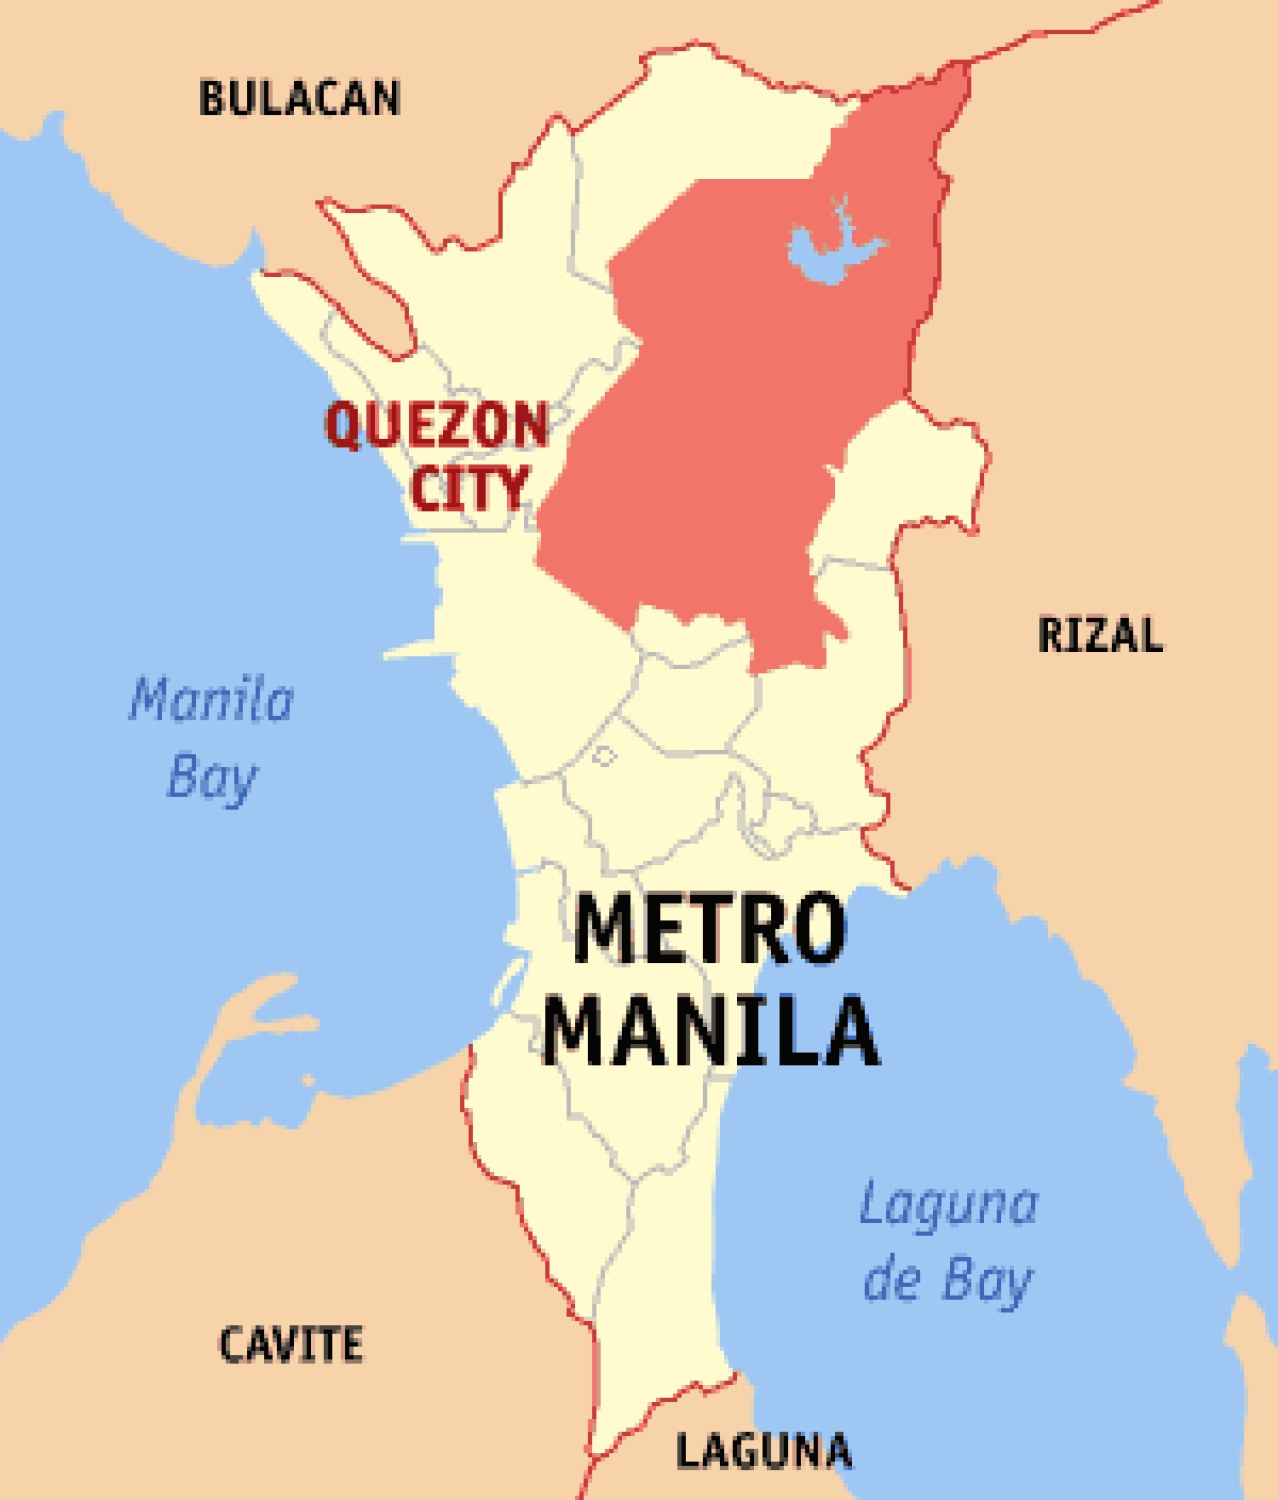 QC official: No meningococcemia outbreak in Novaliches